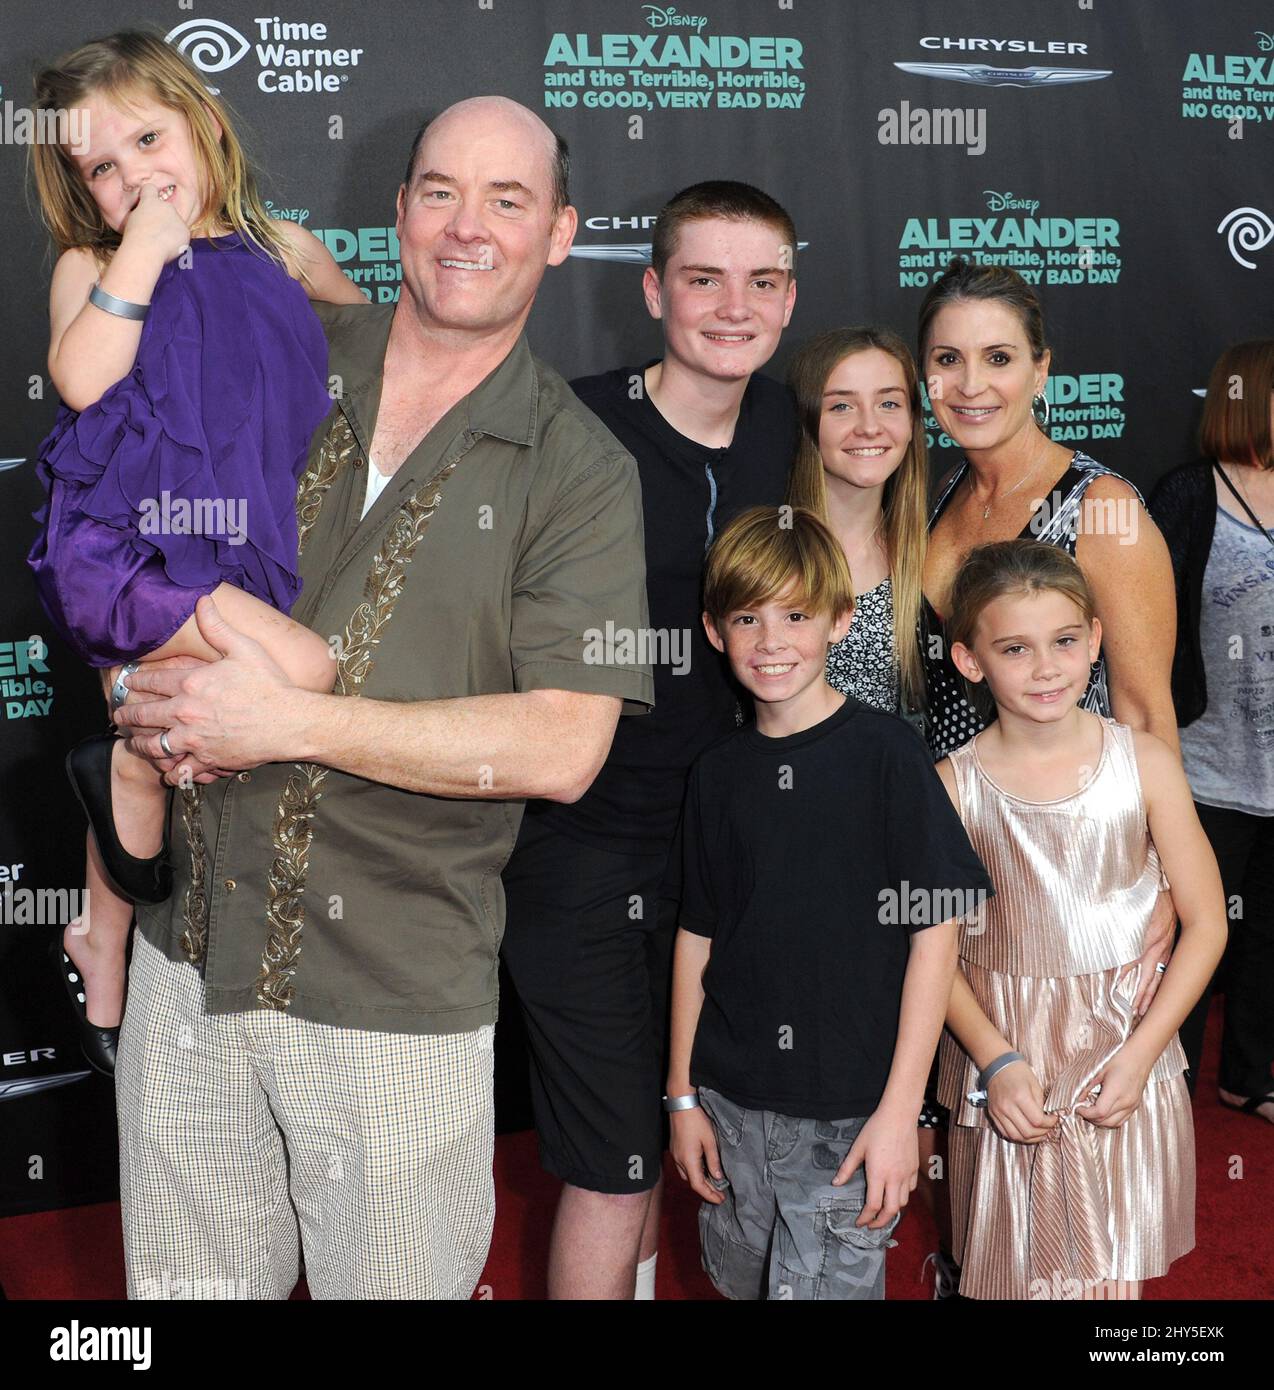 David Koechner attends the 'Alexander And The Terrible, Horrible, No Good, Very Bad Day' Premiere, Los Angeles Stock Photo